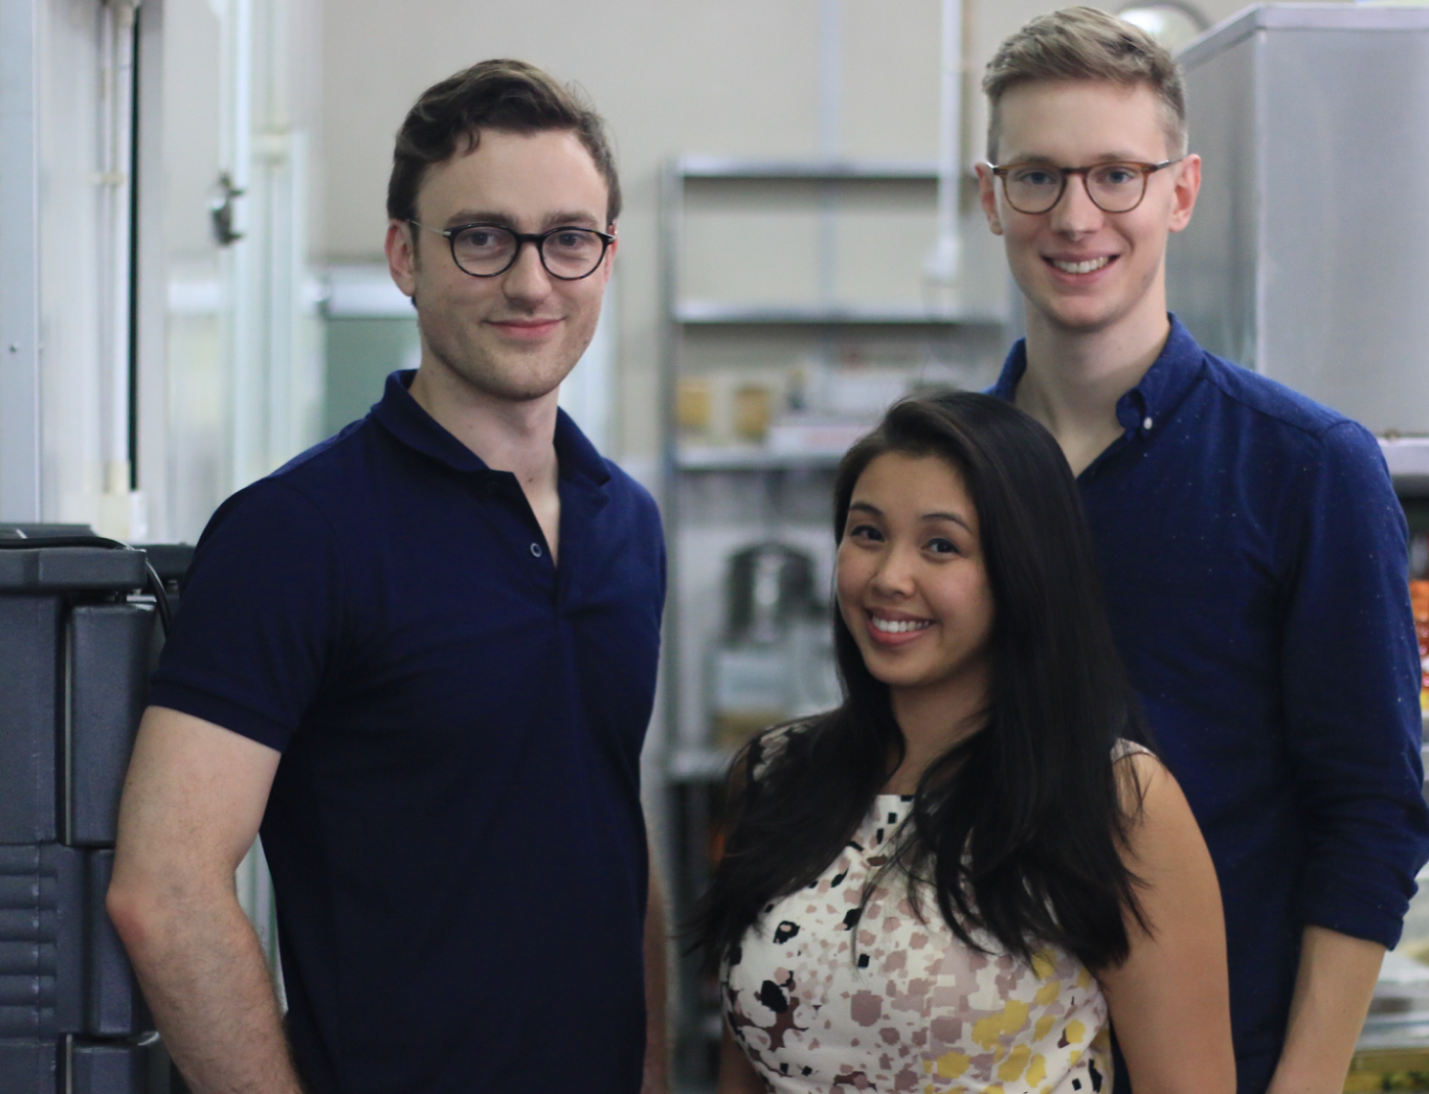 (From left) Dah Makan's founders Jonathan Weins (CEO), Jessica Li (COO) and Christian Edelmann (CTO)